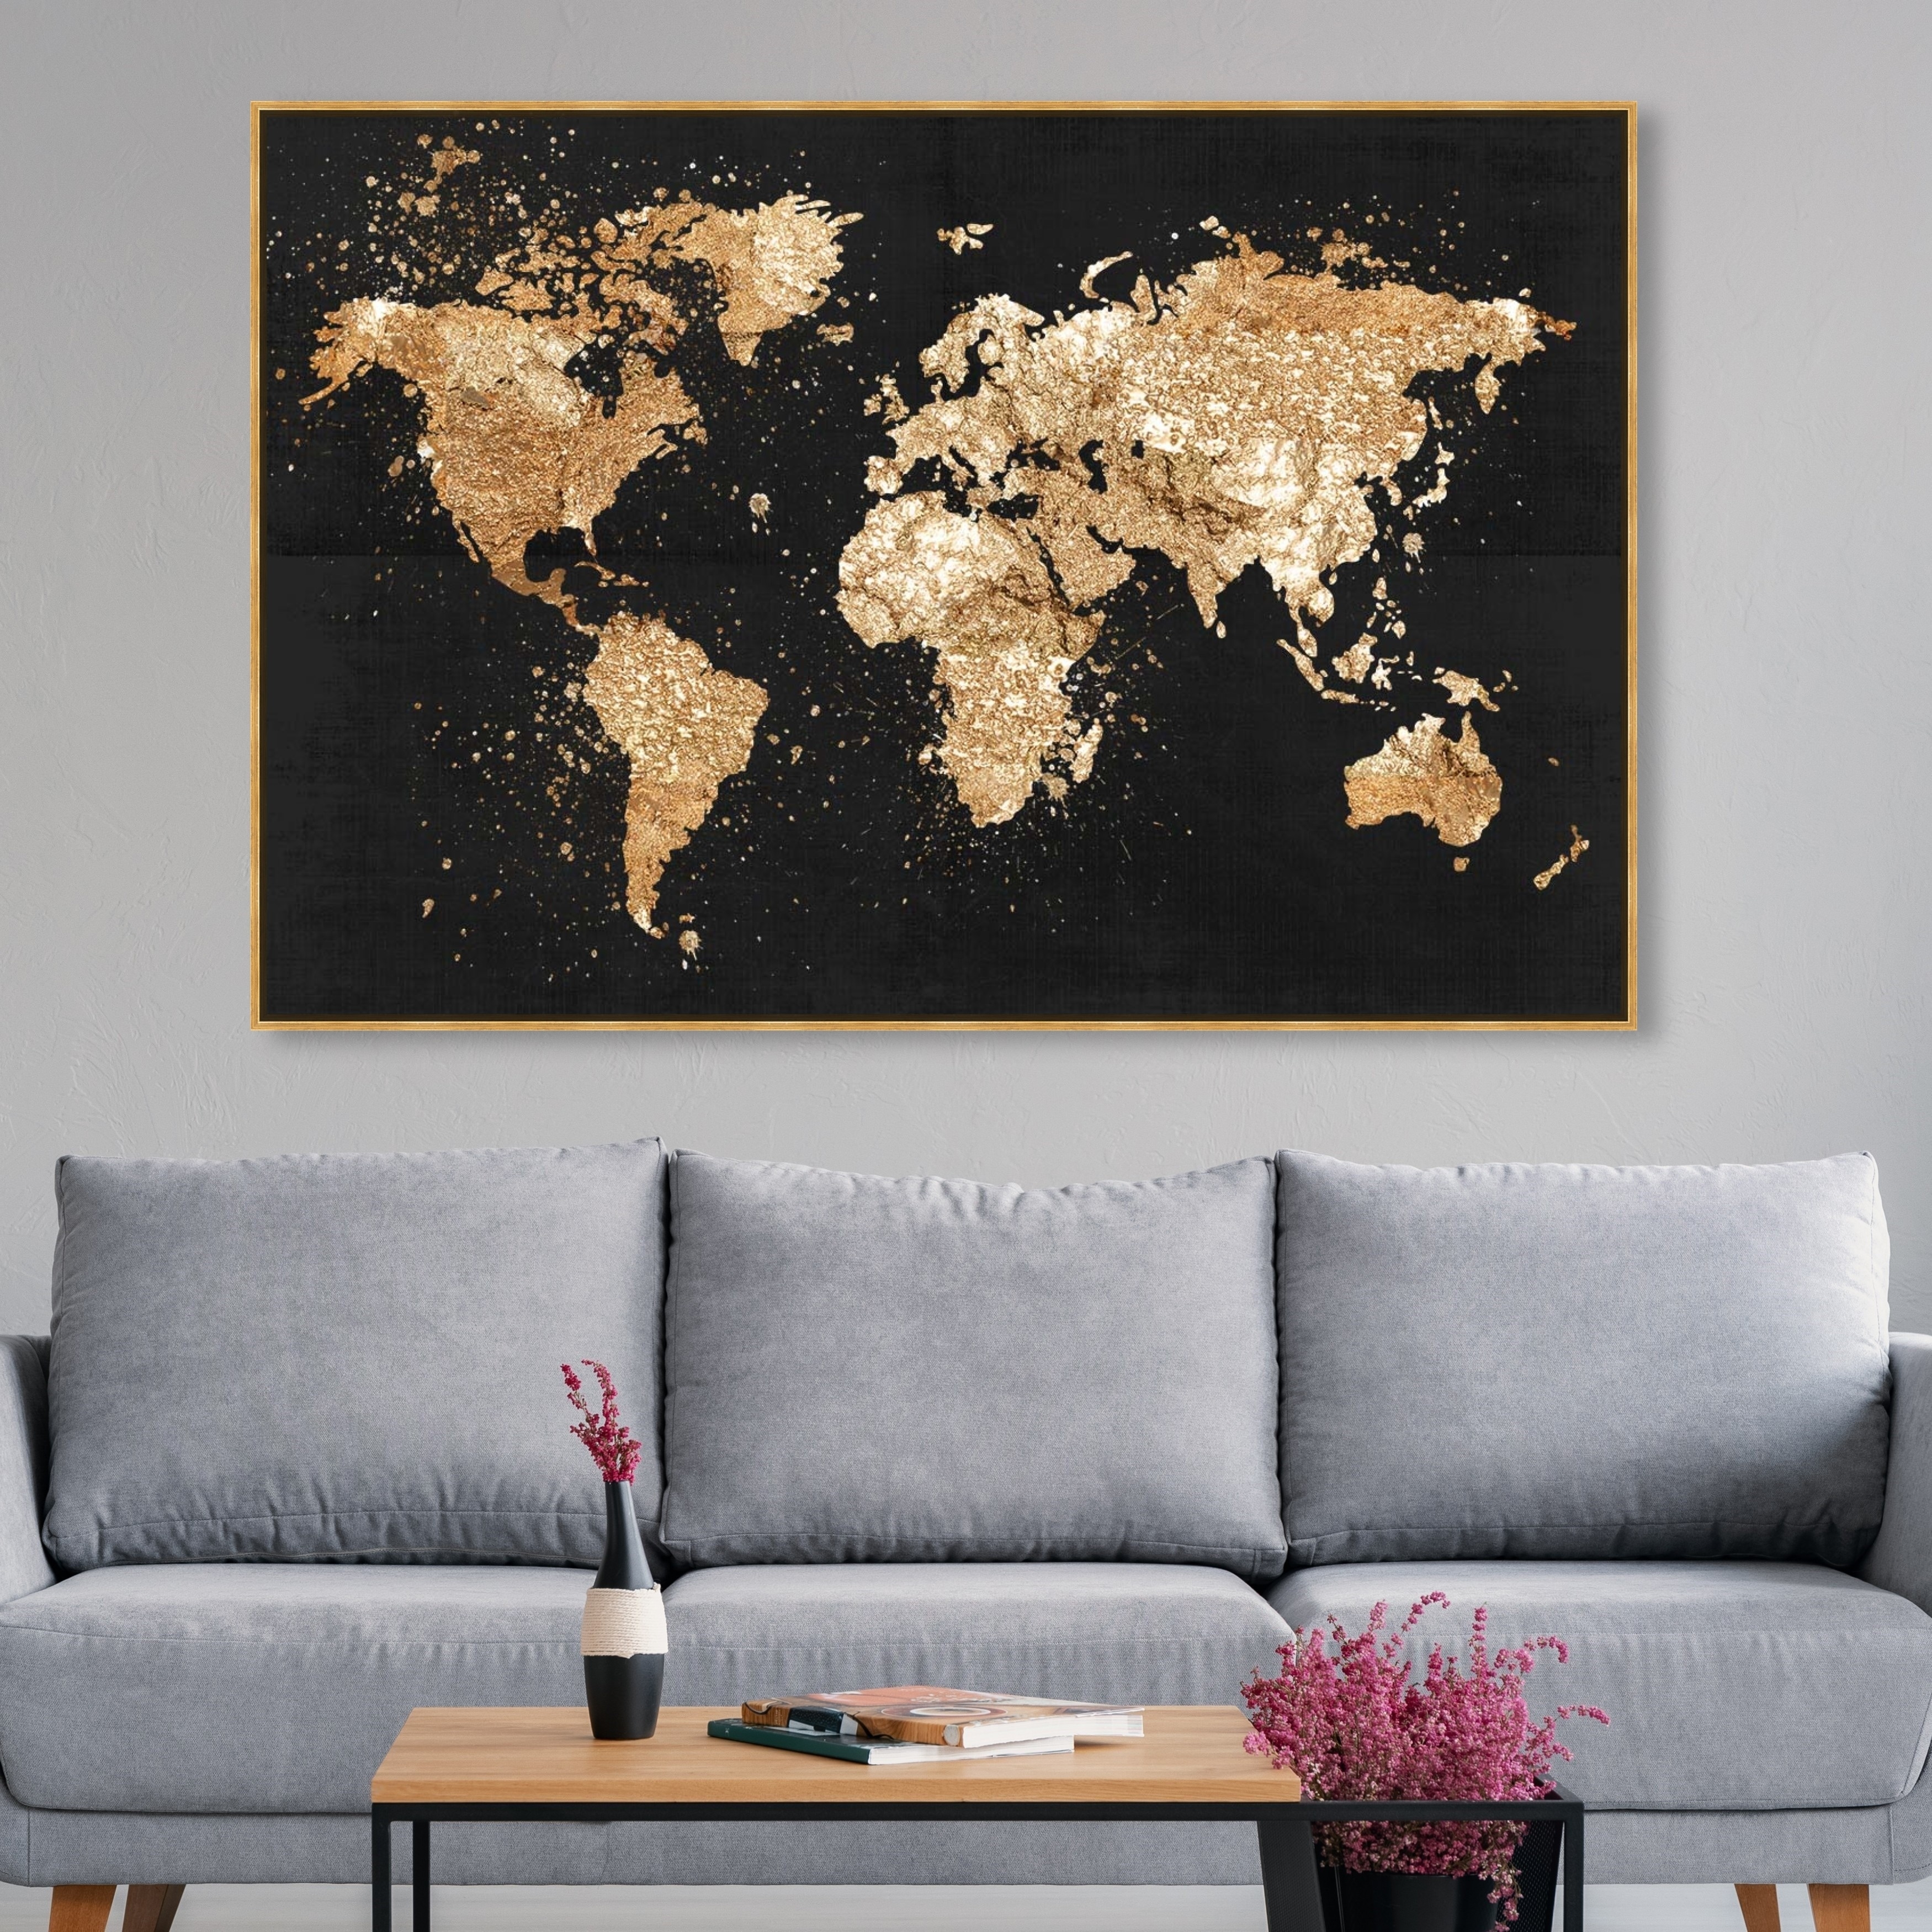 Ideal To Match Maps Cushions Maps Duvets Maps Wall Decals World Maps Lampshades 